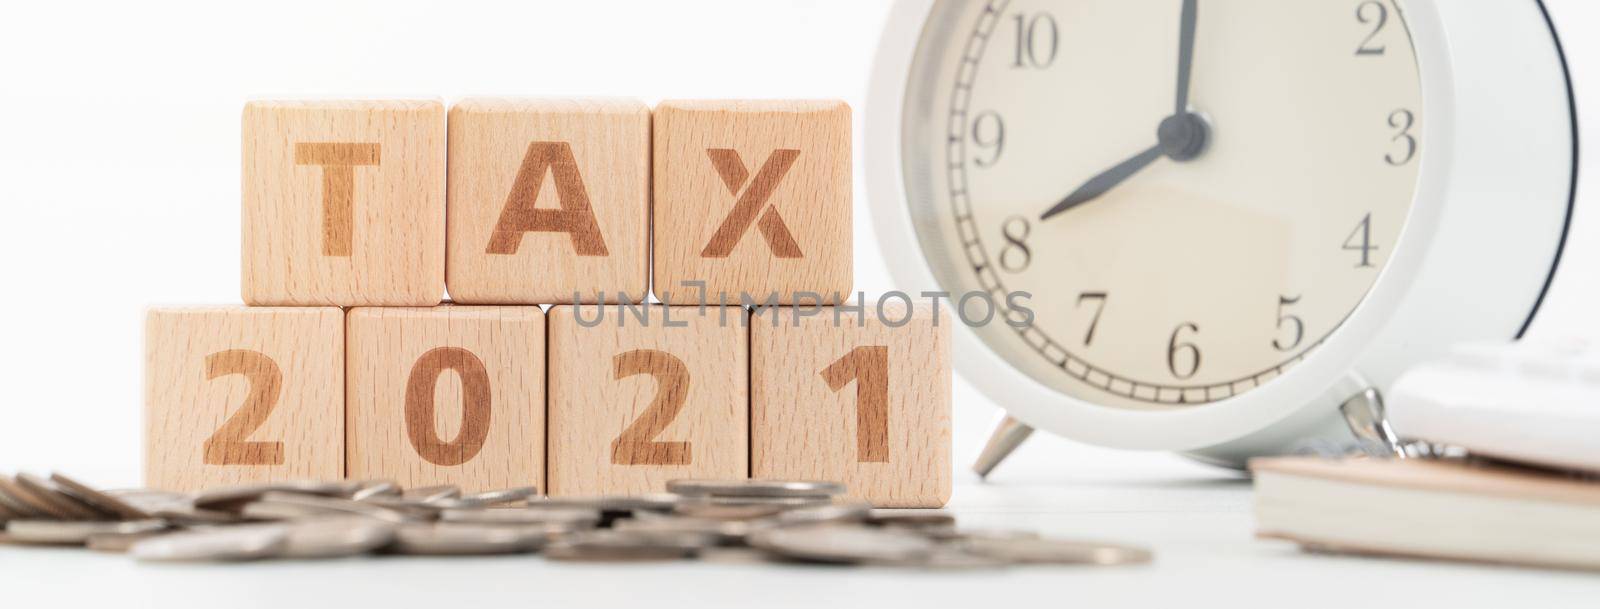 Concept of tax season approaching with wooden blocks, coins and alarm clock over white background.